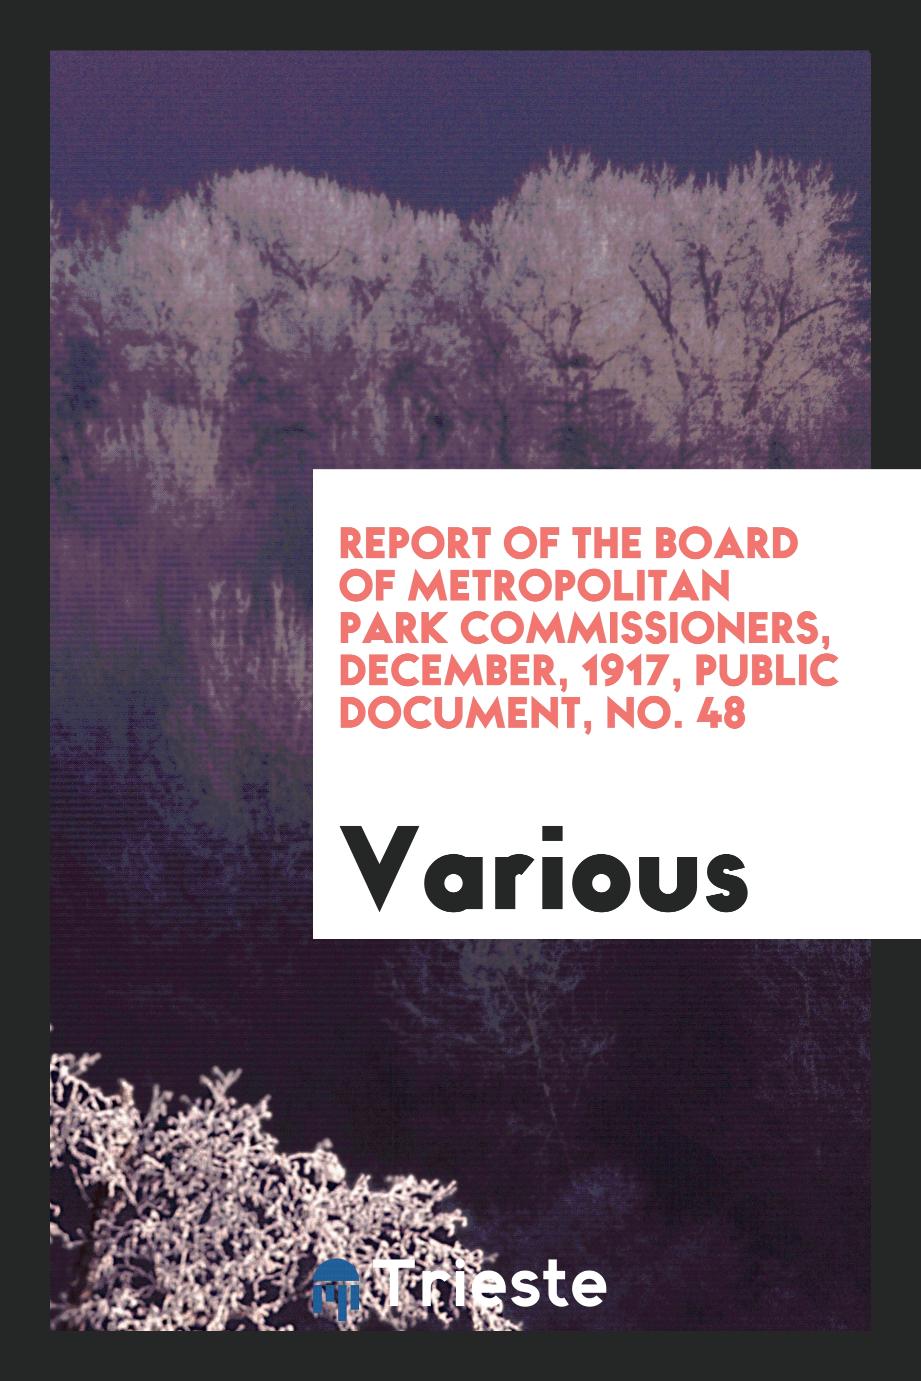 Report of the Board of Metropolitan Park Commissioners, December, 1917, Public document, No. 48